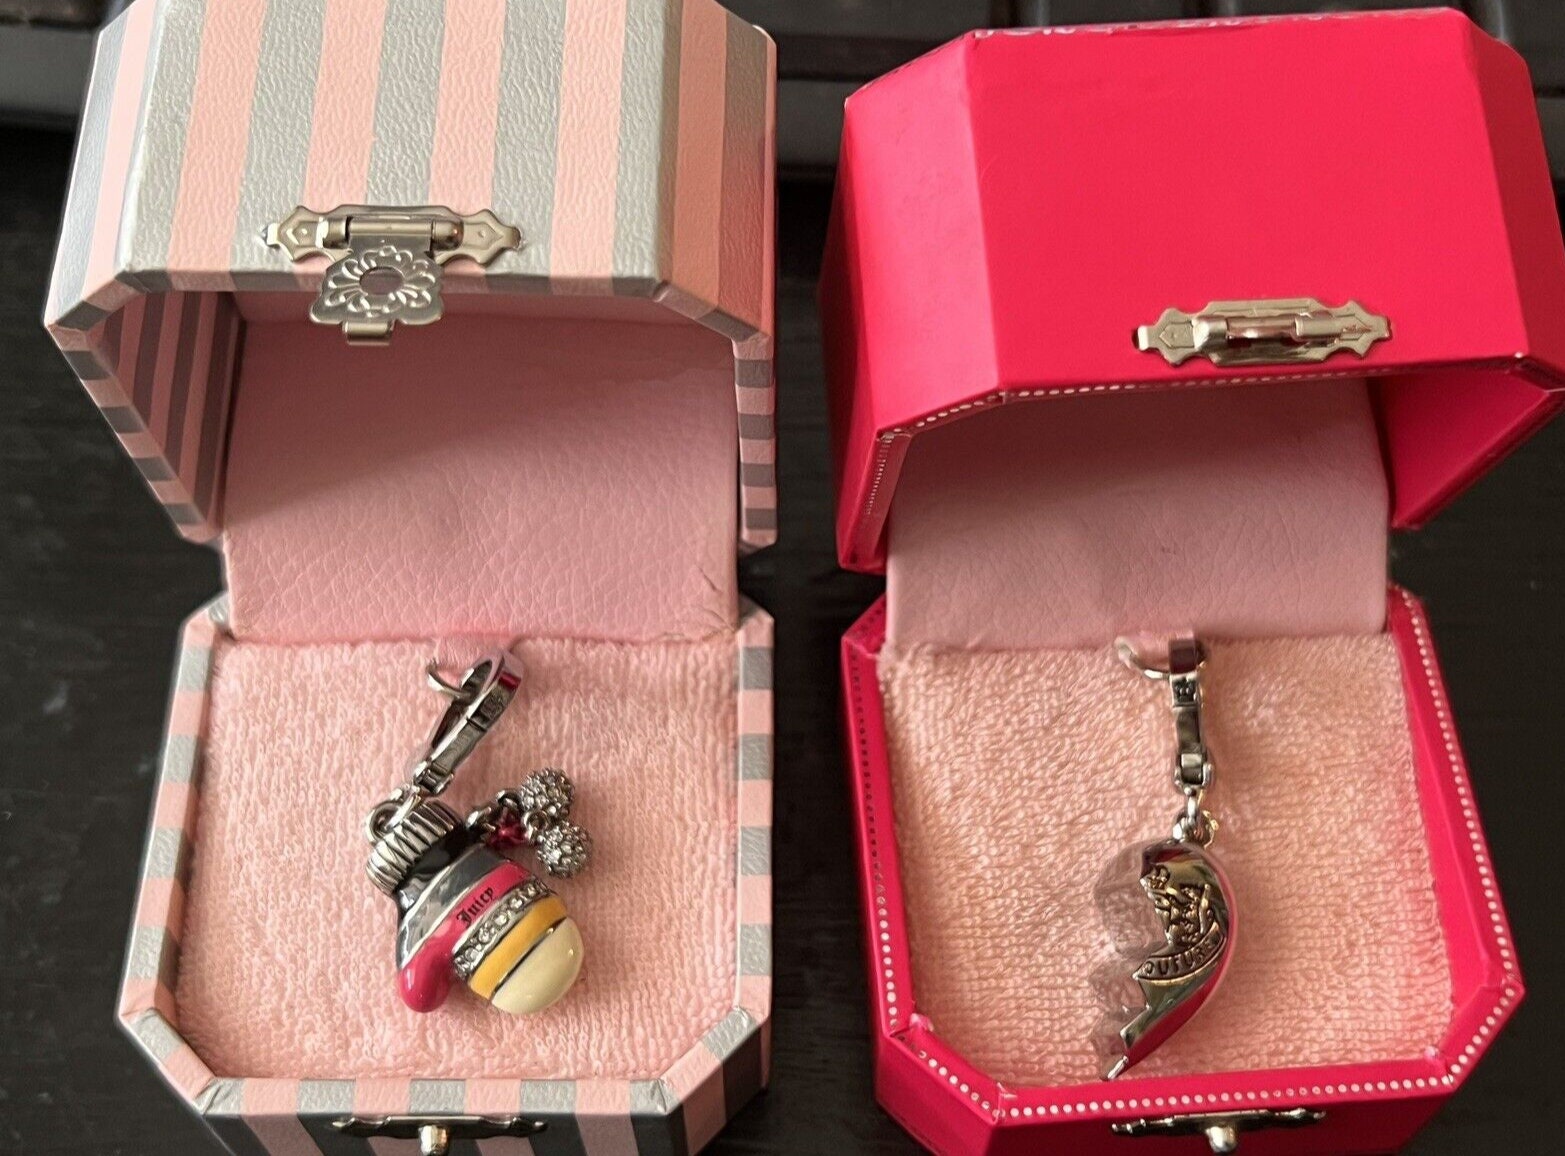 Juicy Couture Official Charm Bracelet Rainbow Charm Bracelet Trendy  Bracelet for Her Mother's Jewelry Gift Set Juicy Make up Bag LGBTQ Gift 